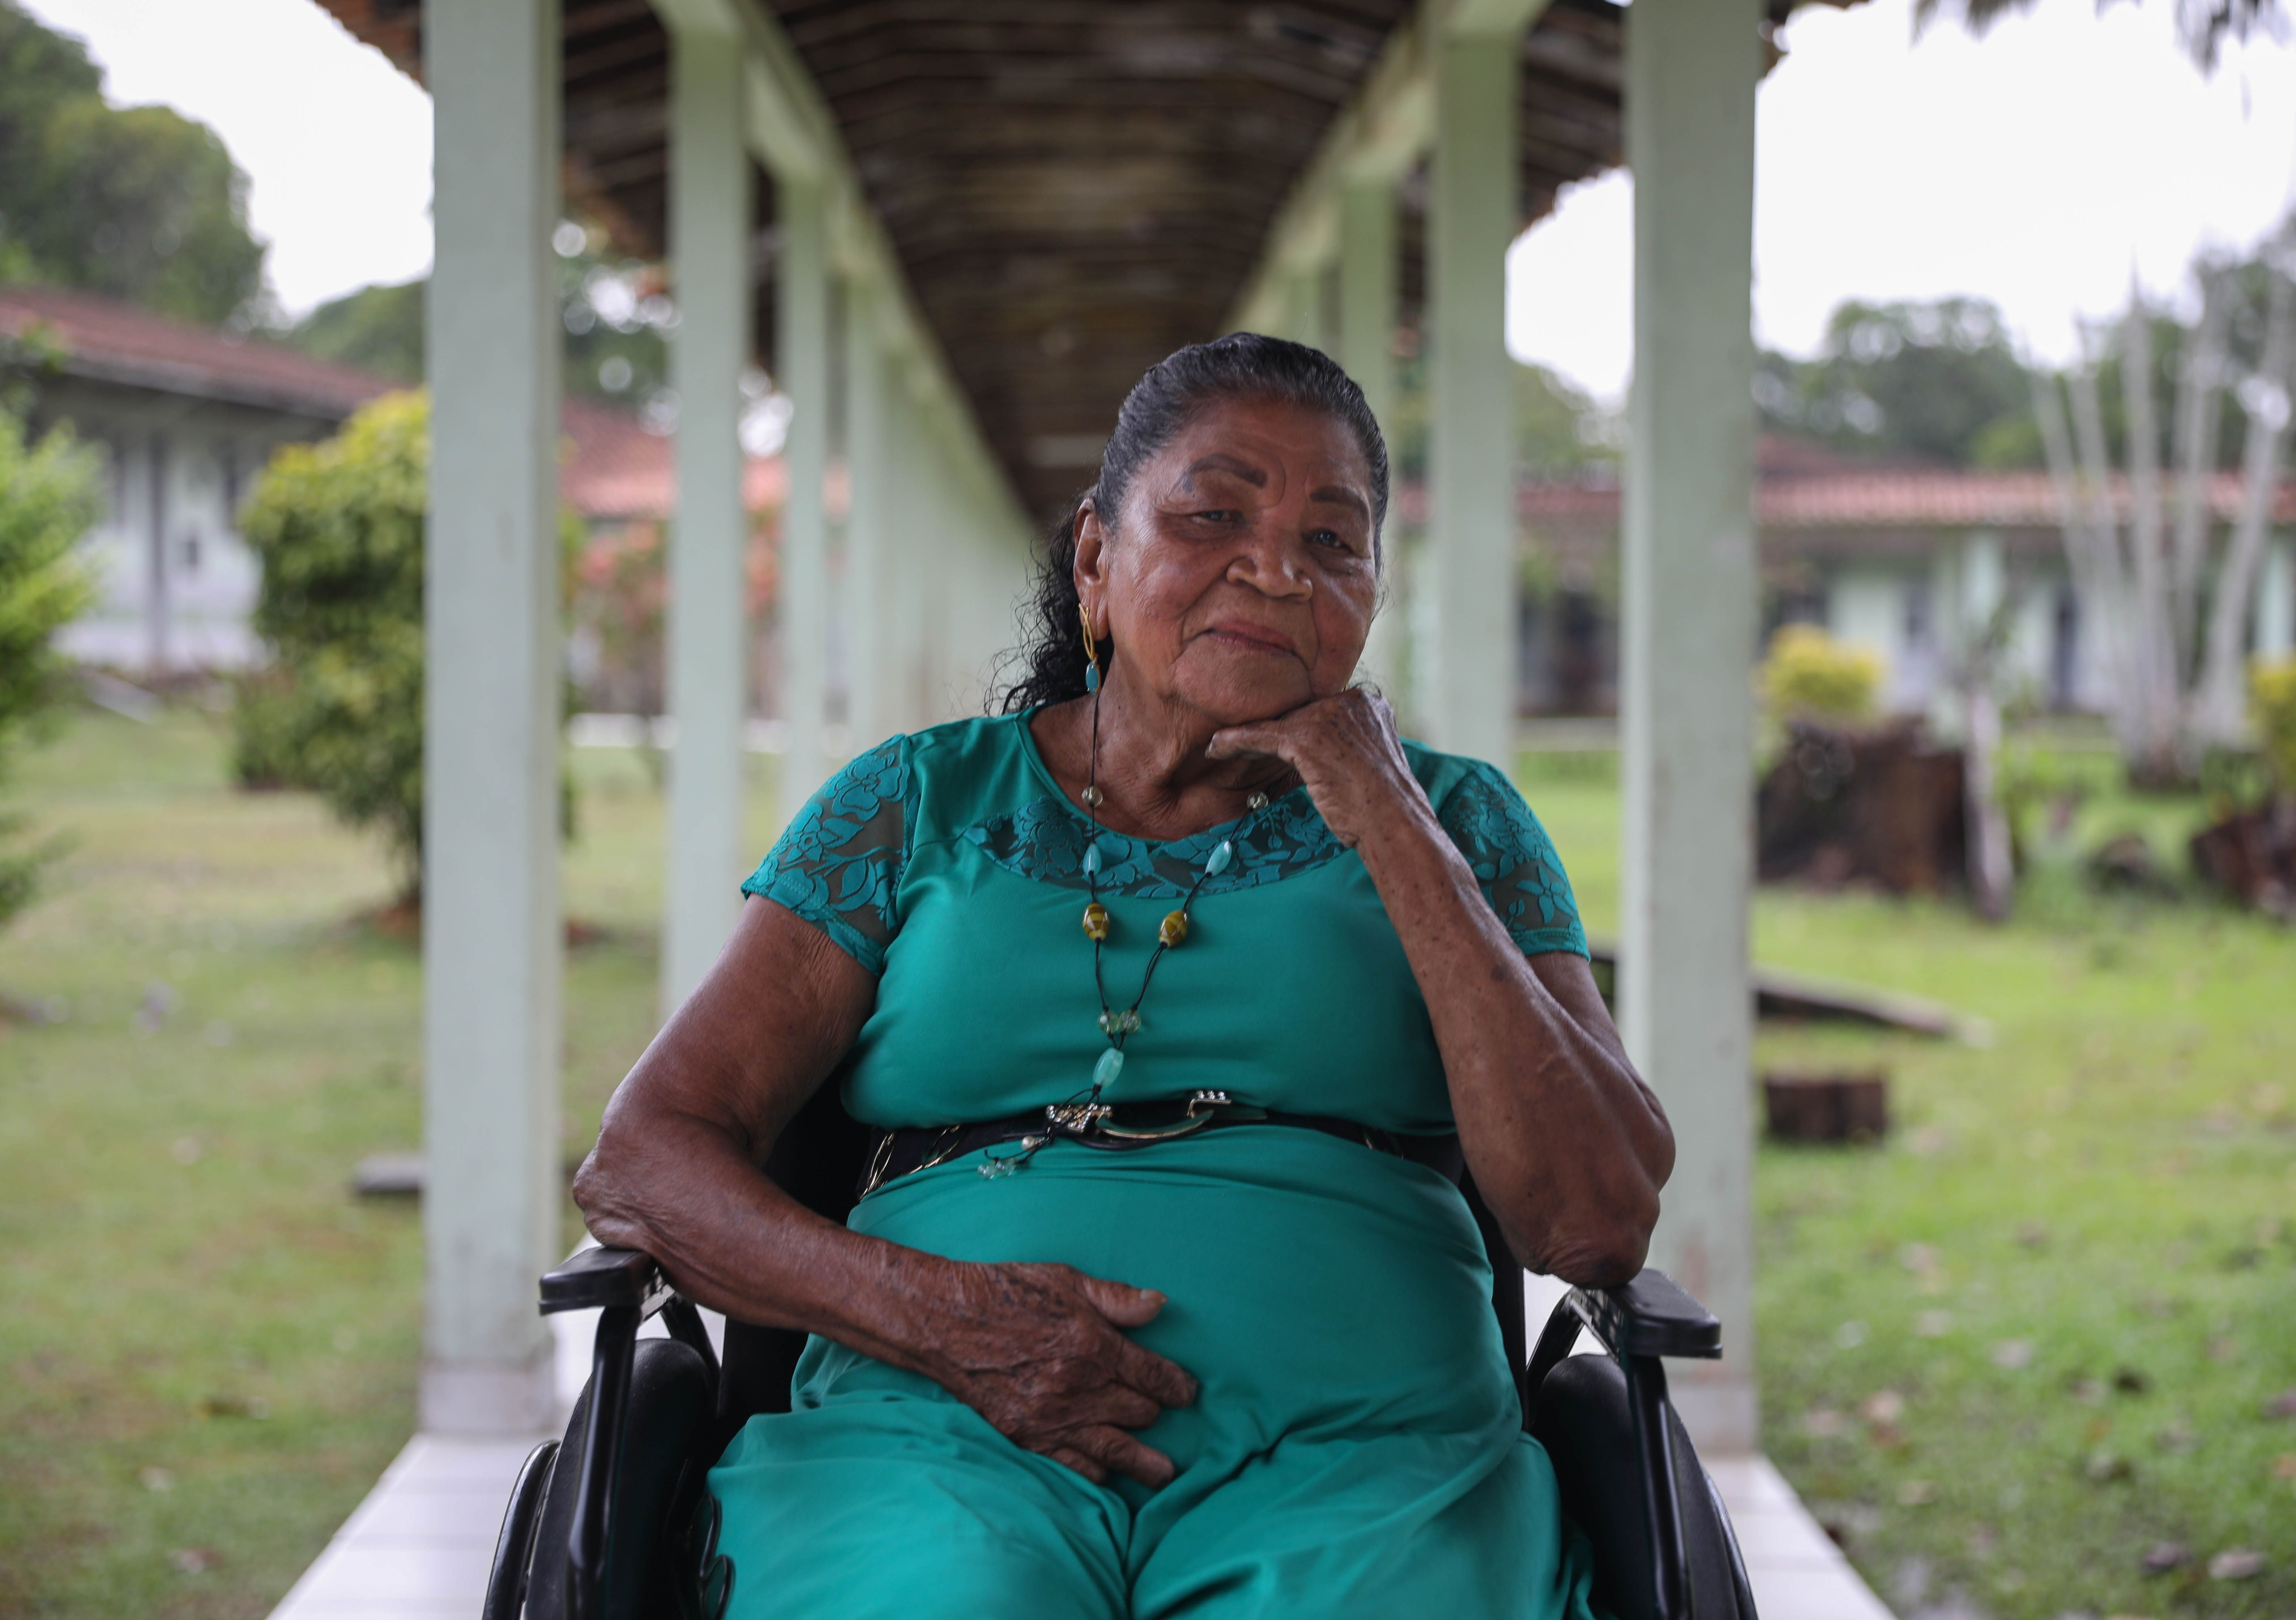 Maria da Silva Trindade is one of the most avid participants of a pilot program within the former colony that is helping residents pursue their education. Image by Anton L. Delgado. Brazil, 2020.